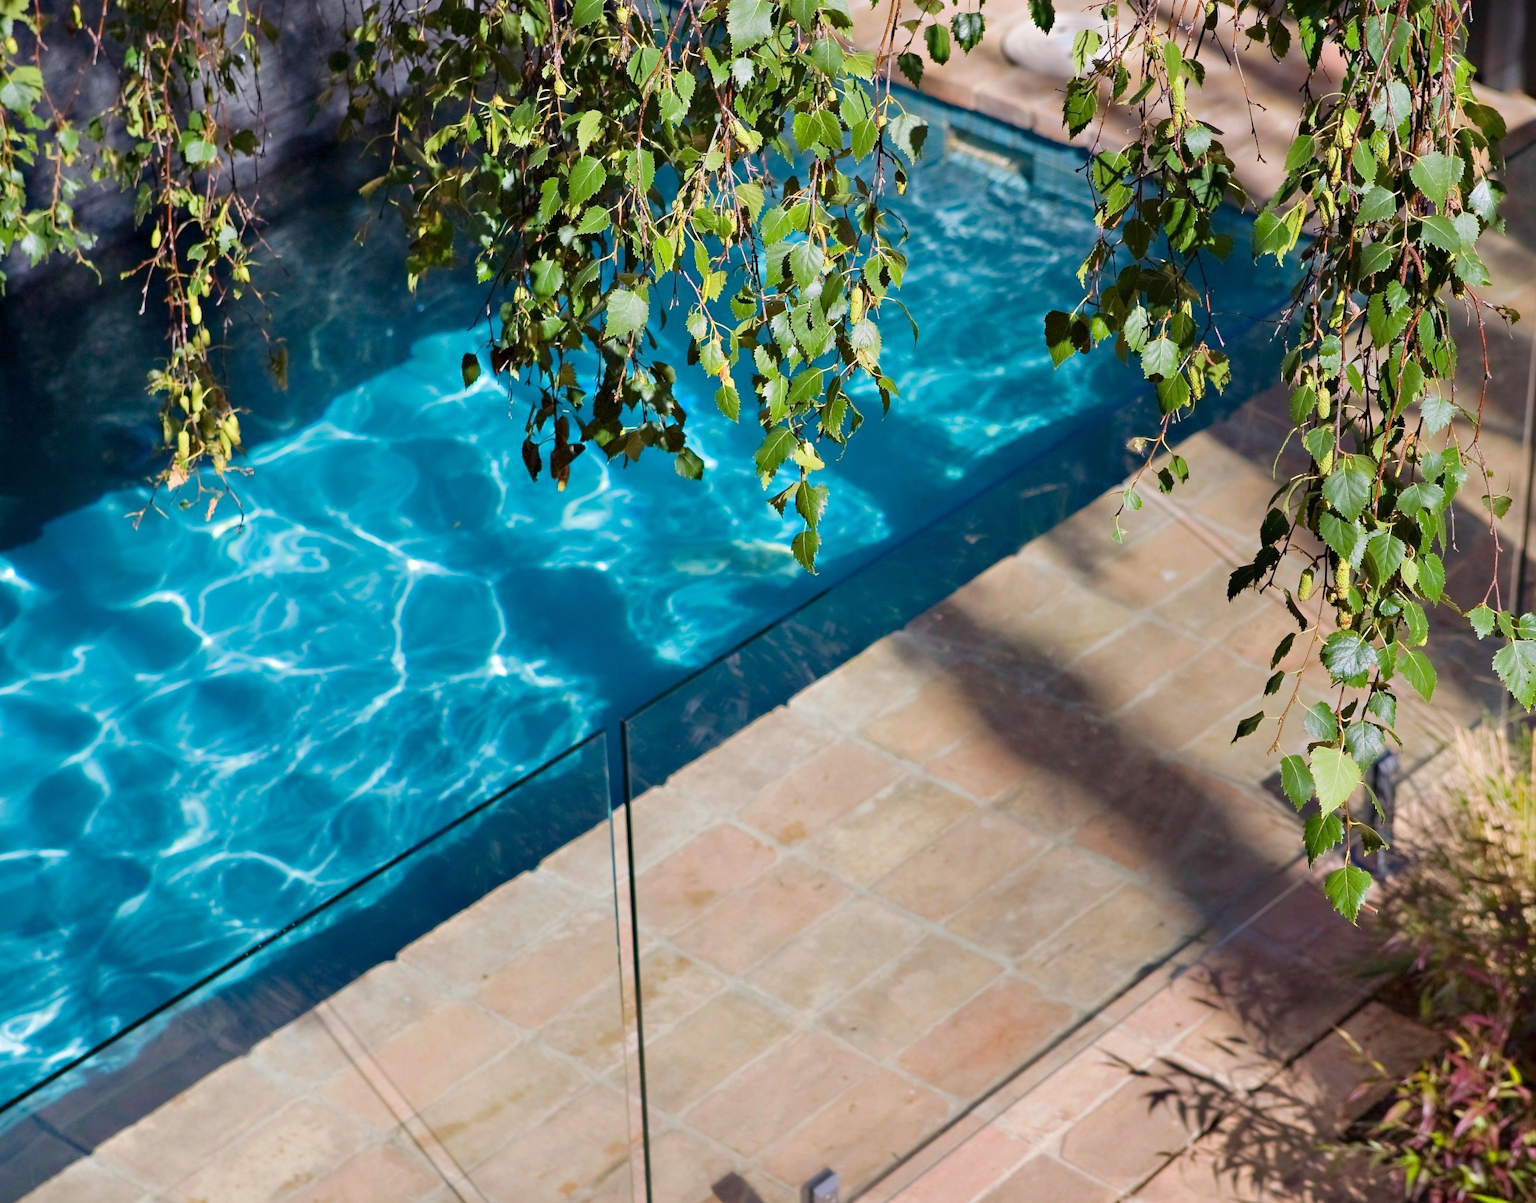 POOL_PAVING__COTTO_ANTICO_LUCE__DESIGN_BY_ECKERSLEY_GARDEN_ARCHITECTURE_EcoOutdoor_1683276944265974